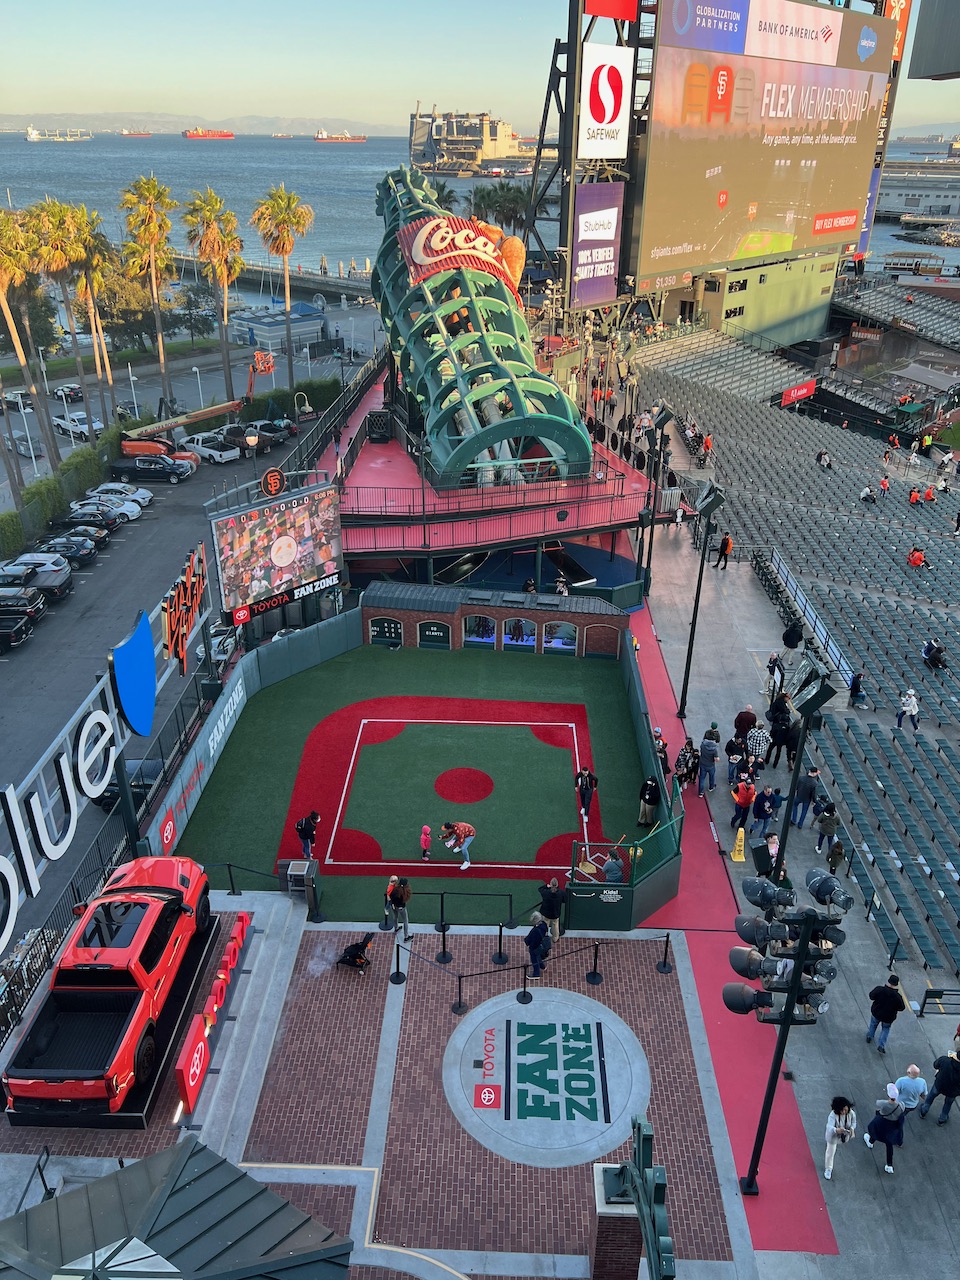 Toyota Fan Zone - It's official: the bullpens at Oracle